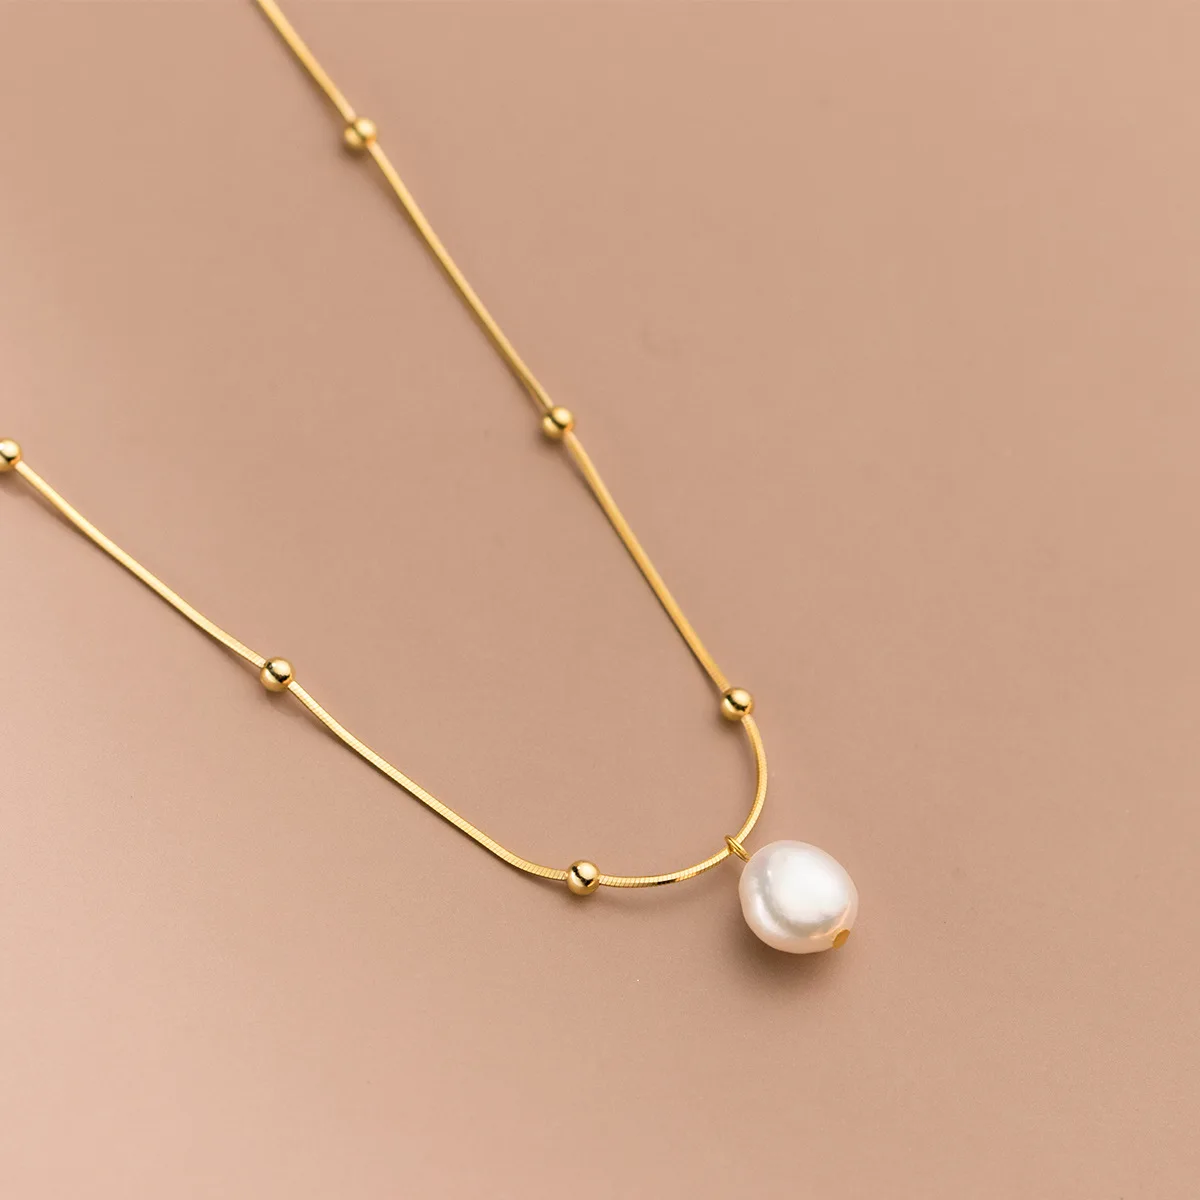 S925 Sterling Silver Fashion Simple Snake Bone Chain Natural Baroque Pearl Necklace For Women Elegant clavicle smycken